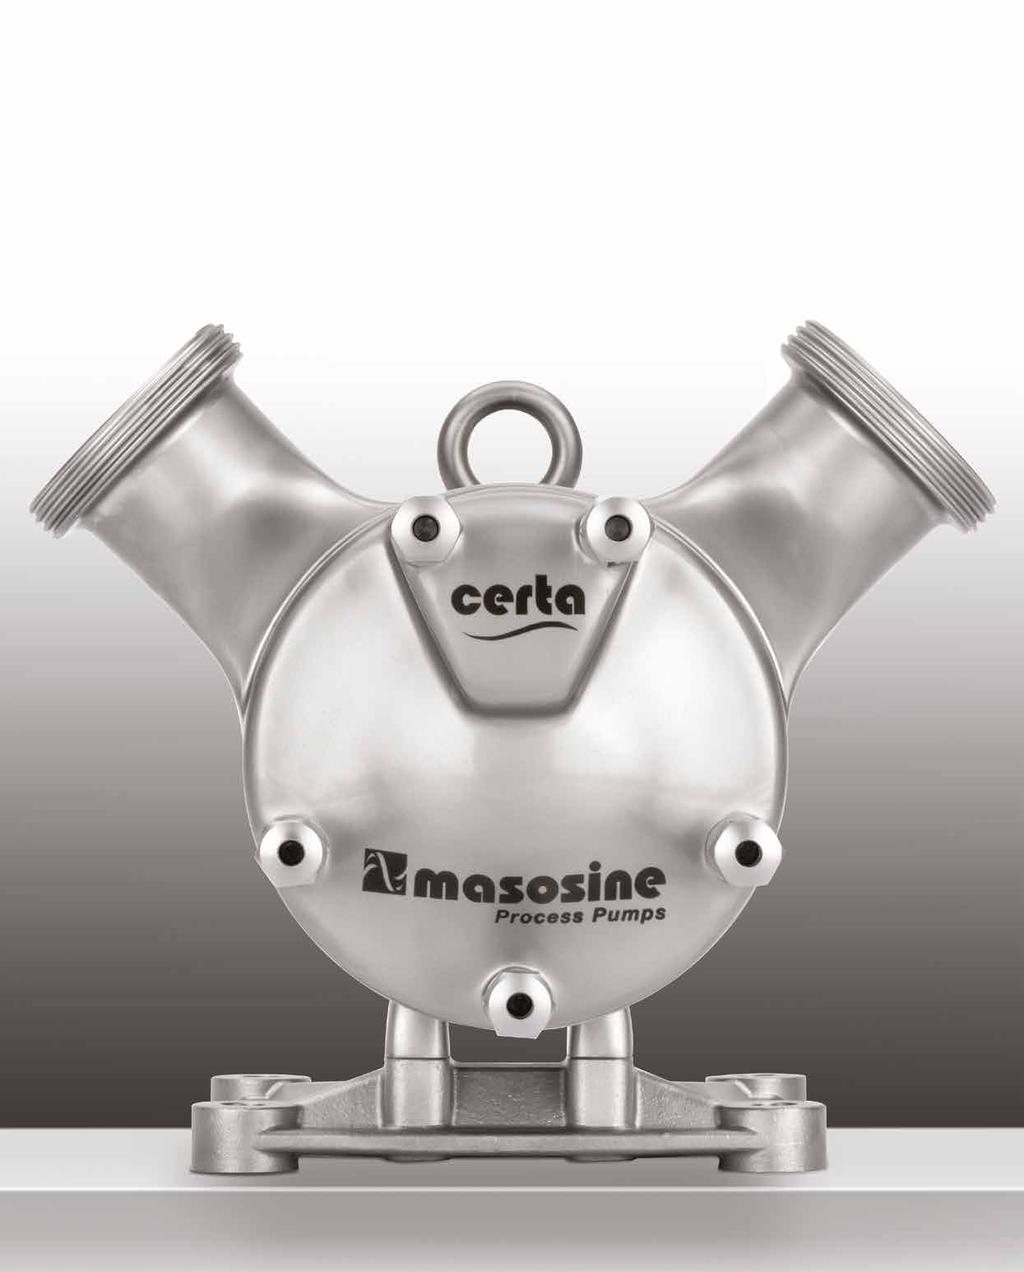 The cleanest pump you will ever need Sine pump advantage by MasoSine TM High suction capability to handle viscous fluids EHEDG Type EL - Class 1 Gentle pumping with virtually no pulsation Ultra low